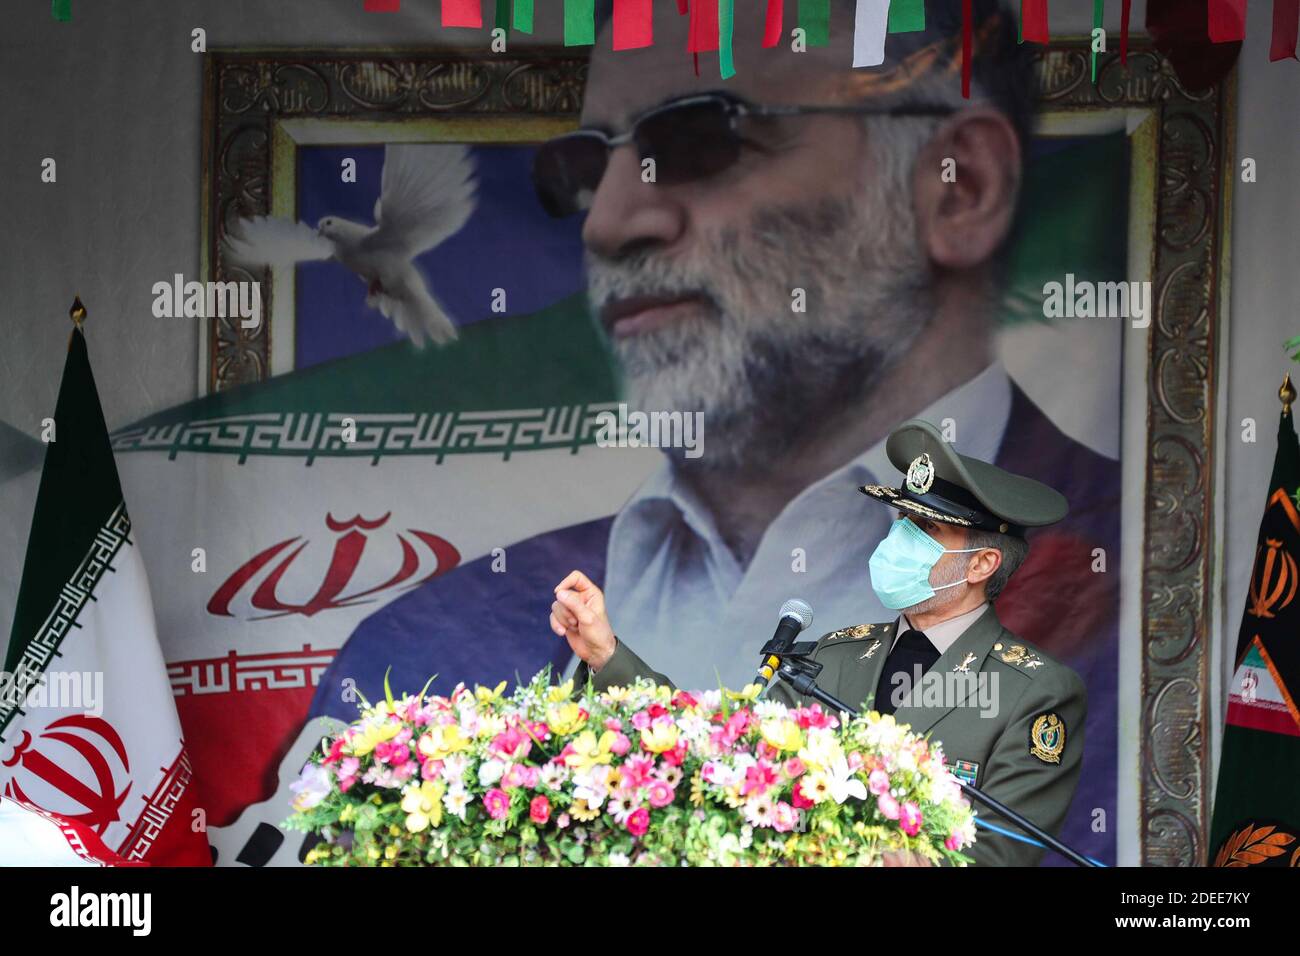 Tehran, Iran. 30th Nov, 2020. A handout photo made available by the Iranian defense ministry office shows Defense Minister Gen. Amir Hatami speaking during funeral of slain Iranian nuclear scientist Mohsen Fakhrizadeh inside the Iranian defense ministry in Tehran, Iran, Monday, November 30. 2020. Iranian officials have blamed Israel for the killing of Fakhrizadeh who led Tehran's disbanded military nuclear program. Photo by Iranian Defense Ministry/UPI Credit: UPI/Alamy Live News Stock Photo